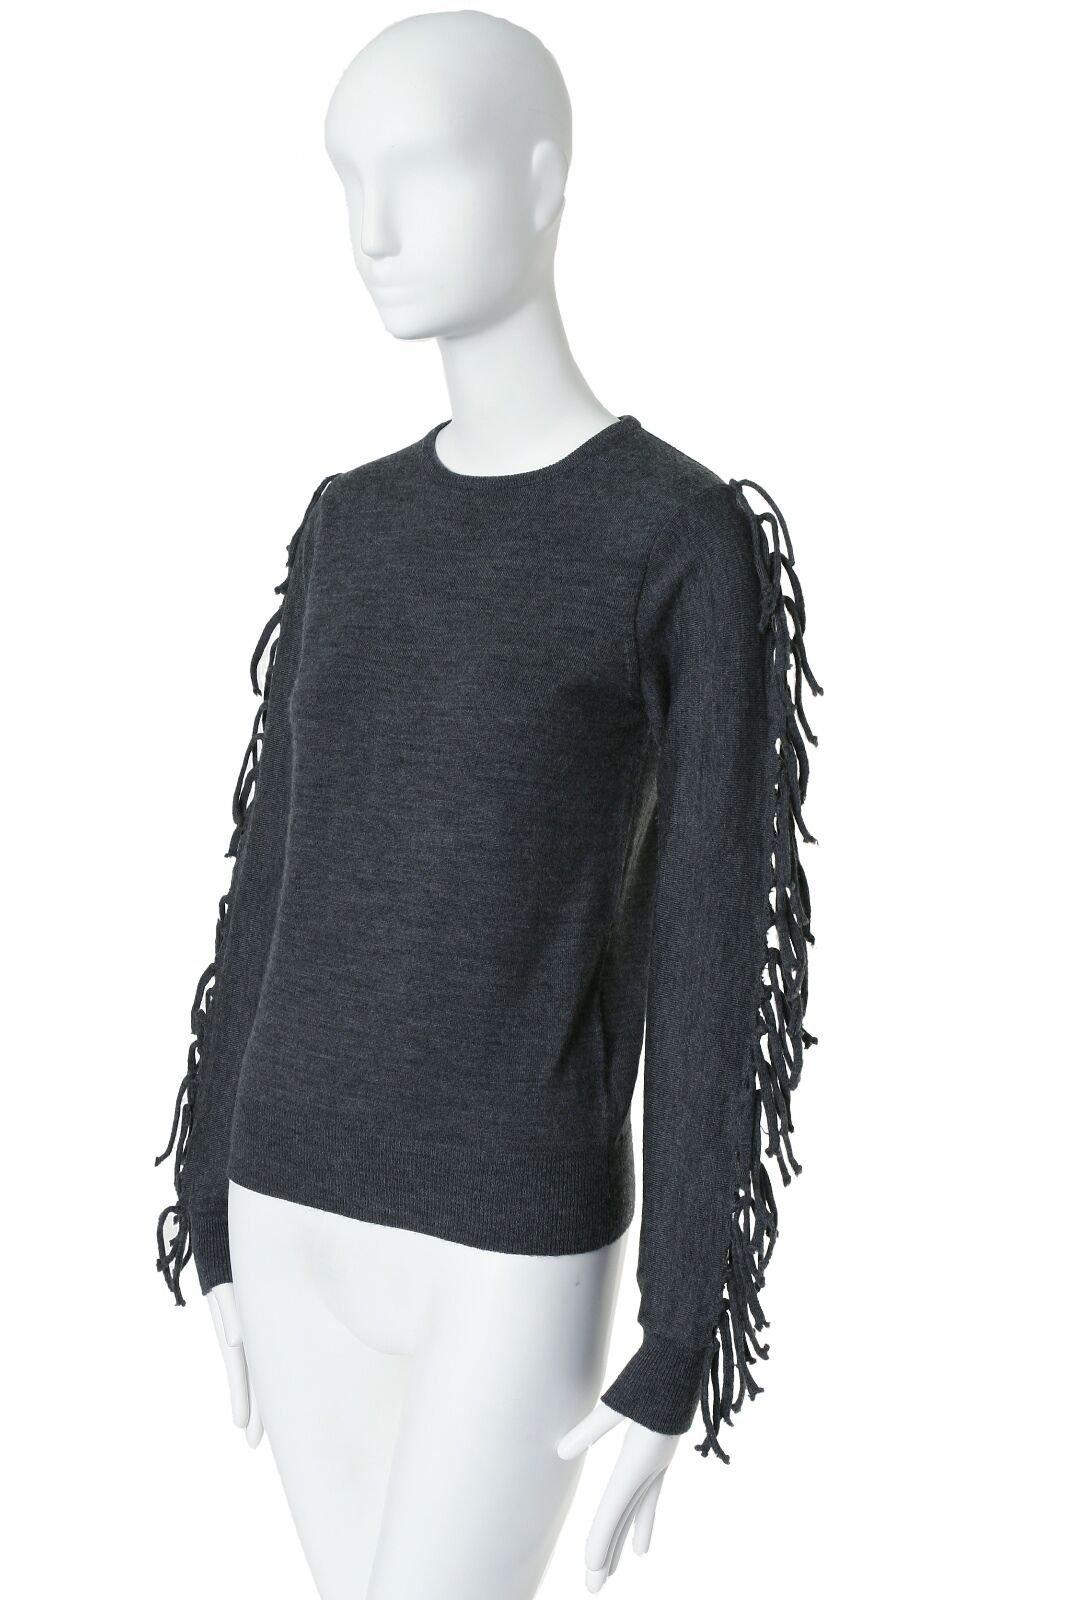 TOGA PULLA grey fringe tie sleeves wool knitted sweater pullover top S US4 JP1 Reference: CAWG/A00029 Brand: Toga Archives Material: Wool Color: Grey Extra Detail: Grey wool. Ribbed collar. Stretch hem. Long sleeves. Tie ribbon detail on sleeves.